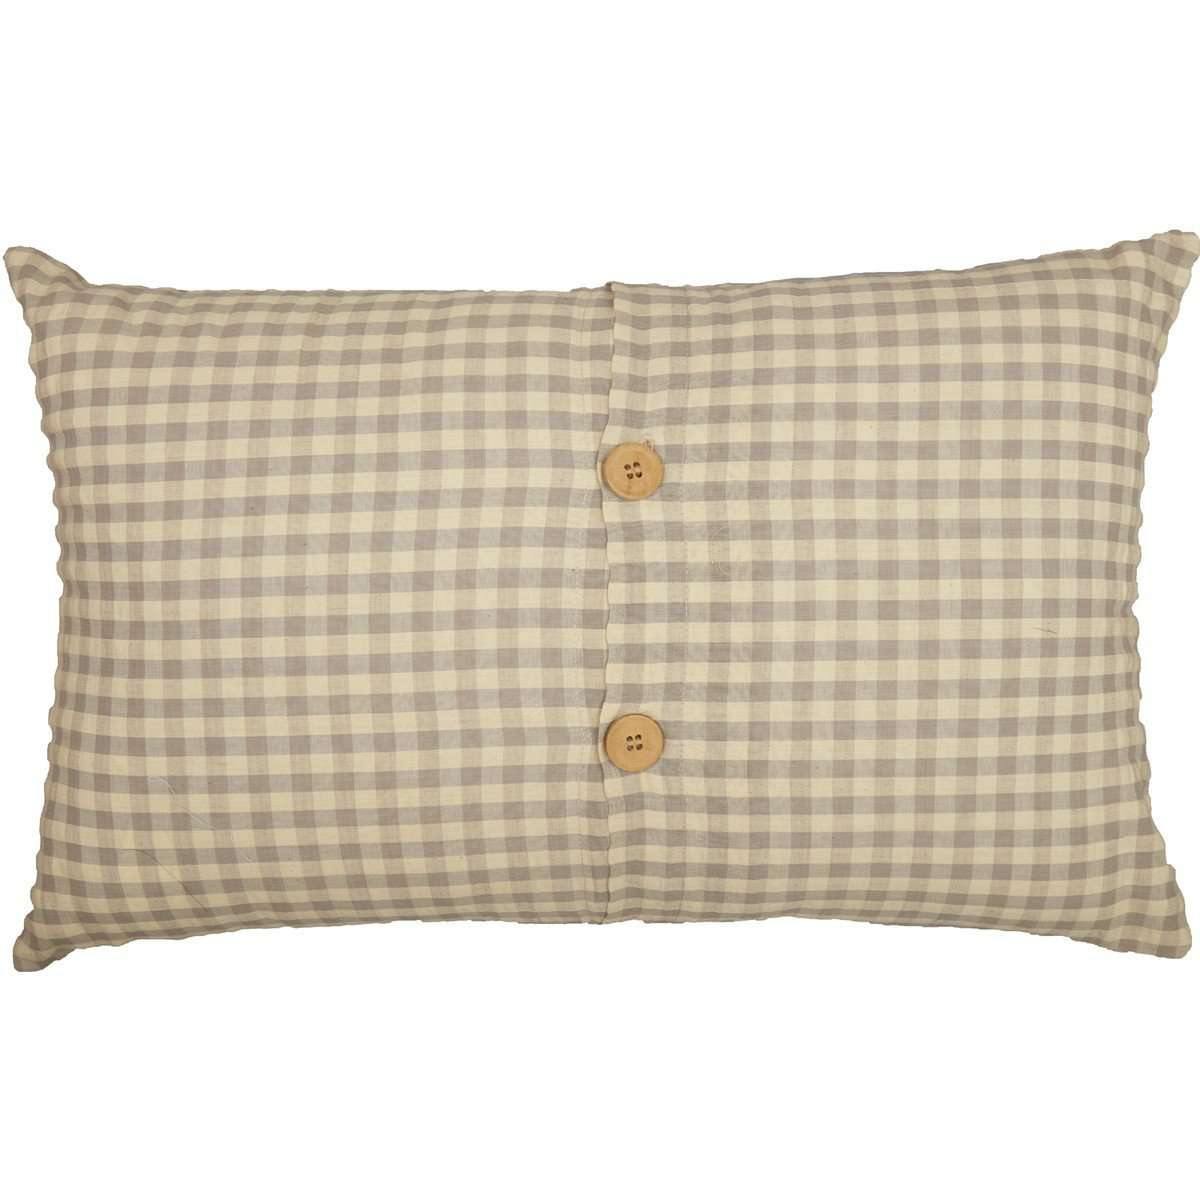 Grace Welcome Harvest Pillow 14x22 VHC Brands back